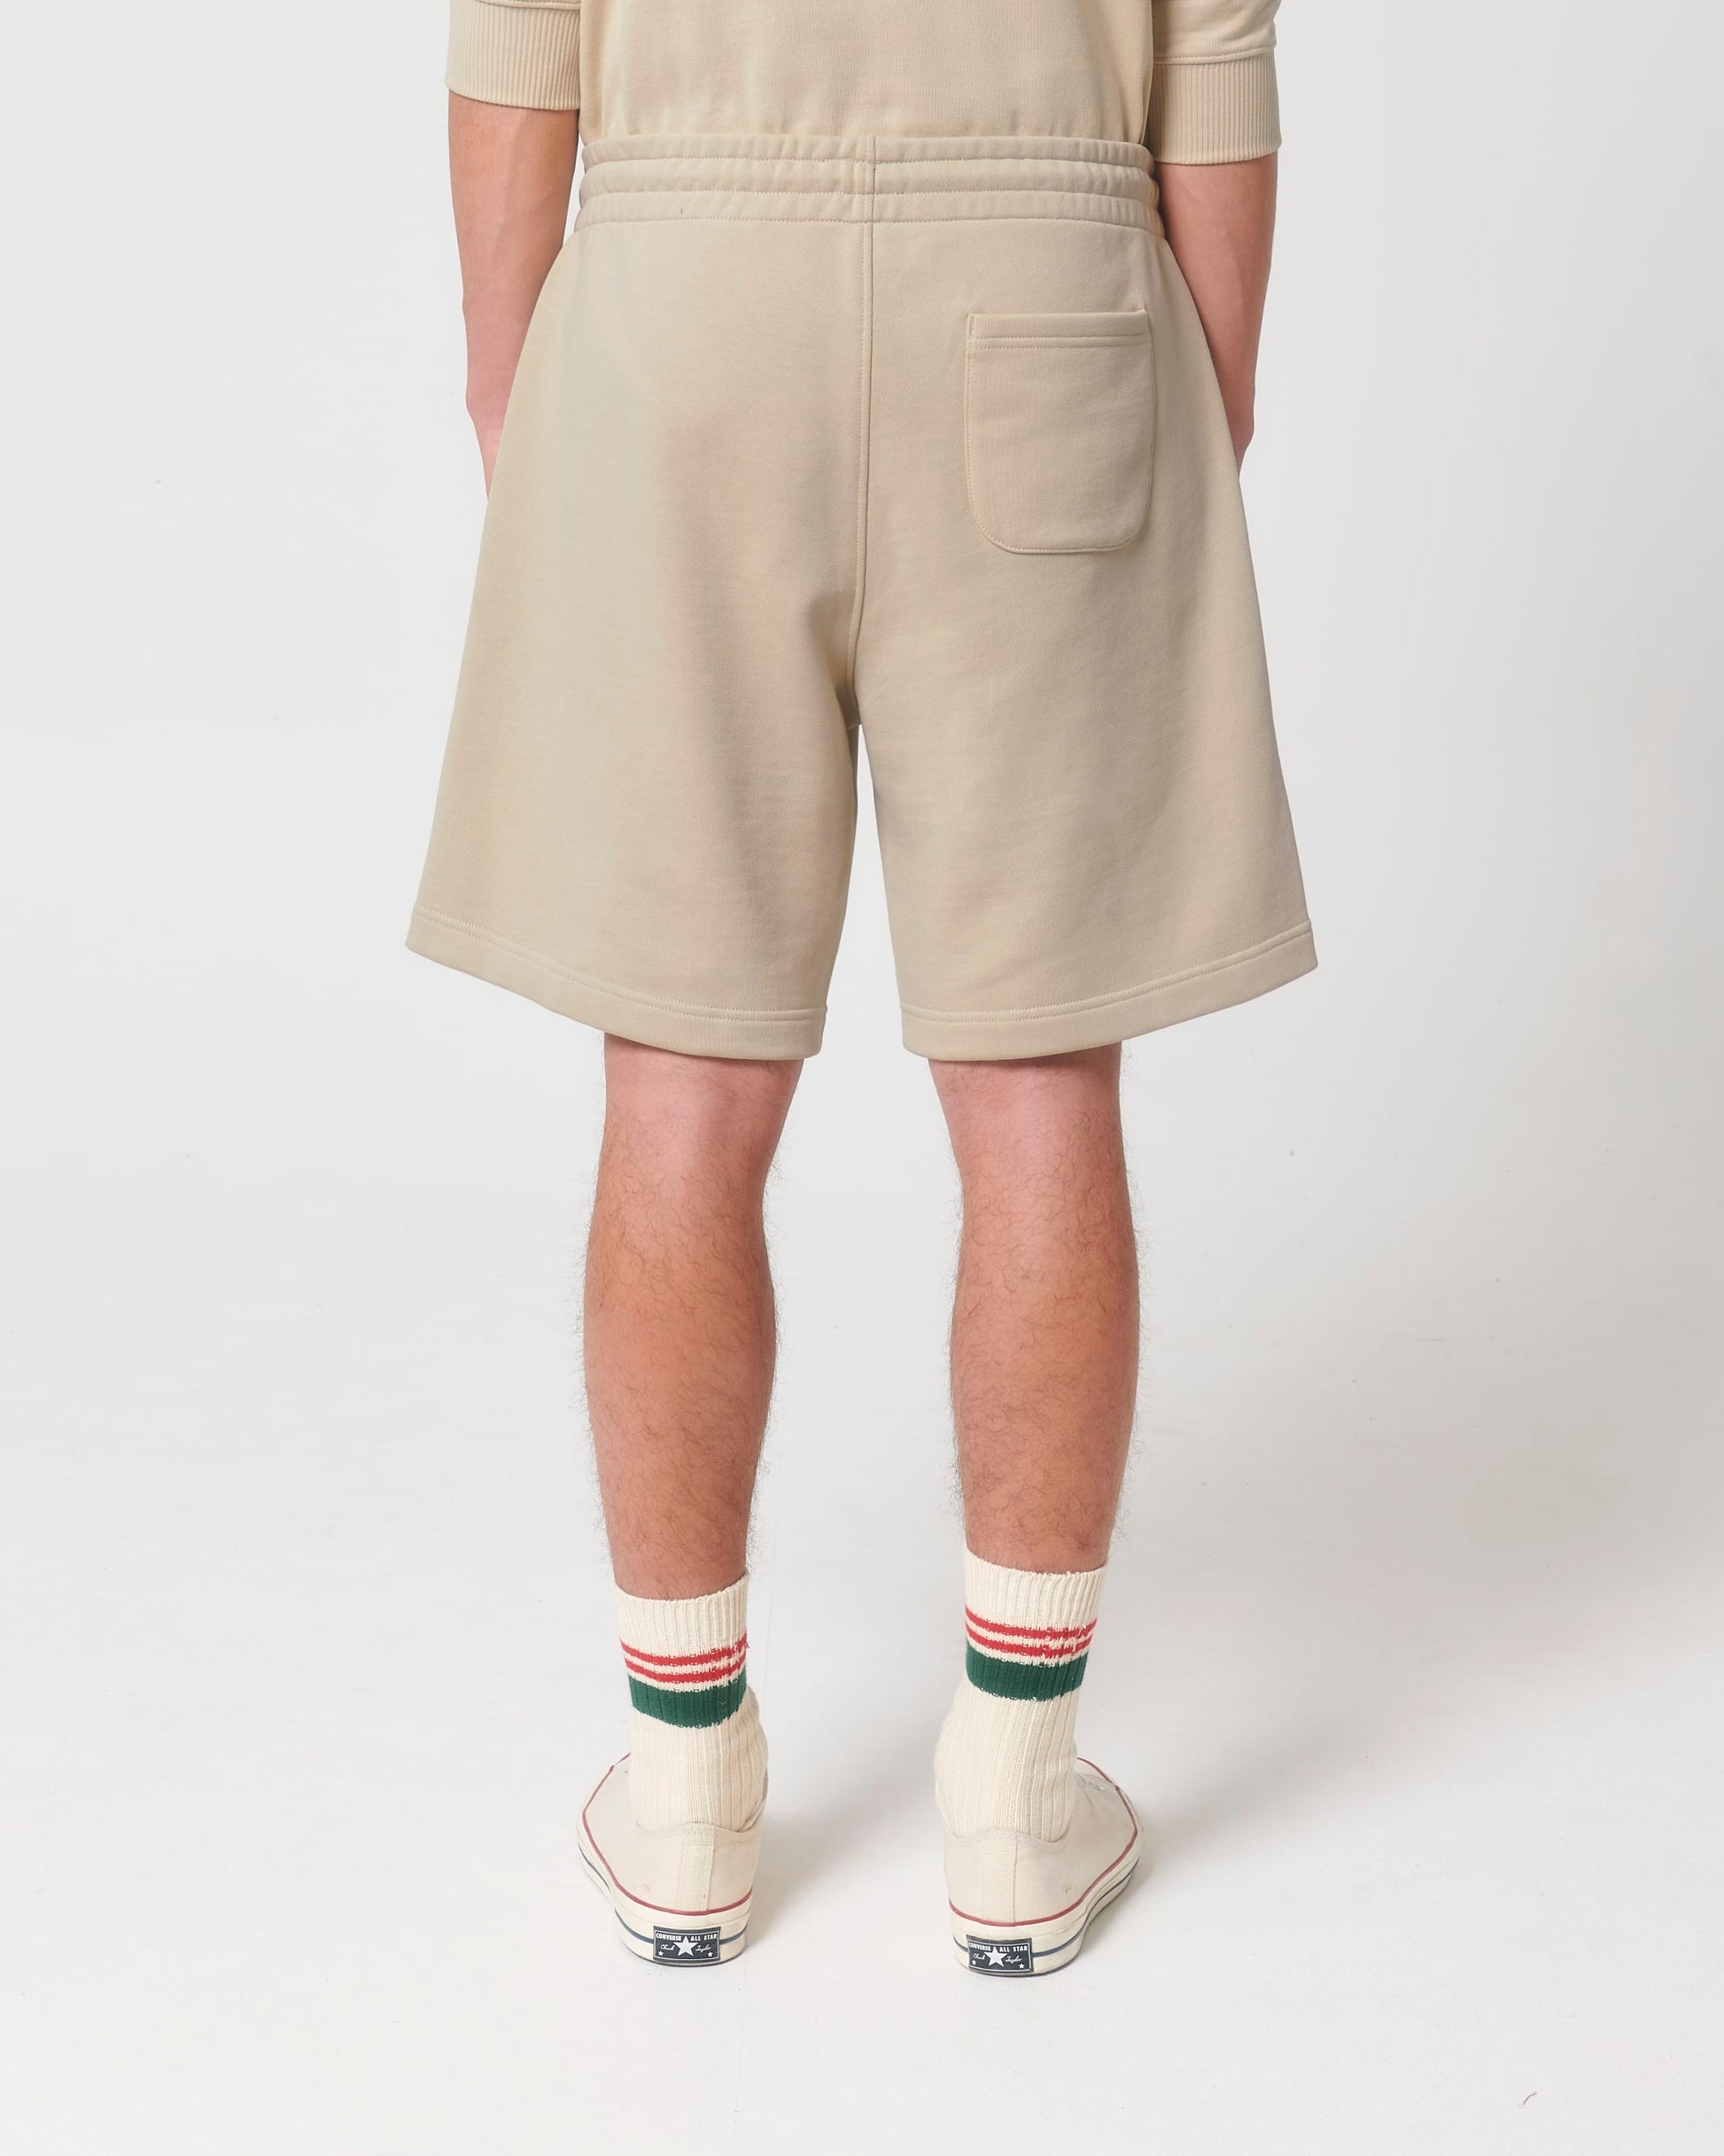 Boarder Dry Shorts